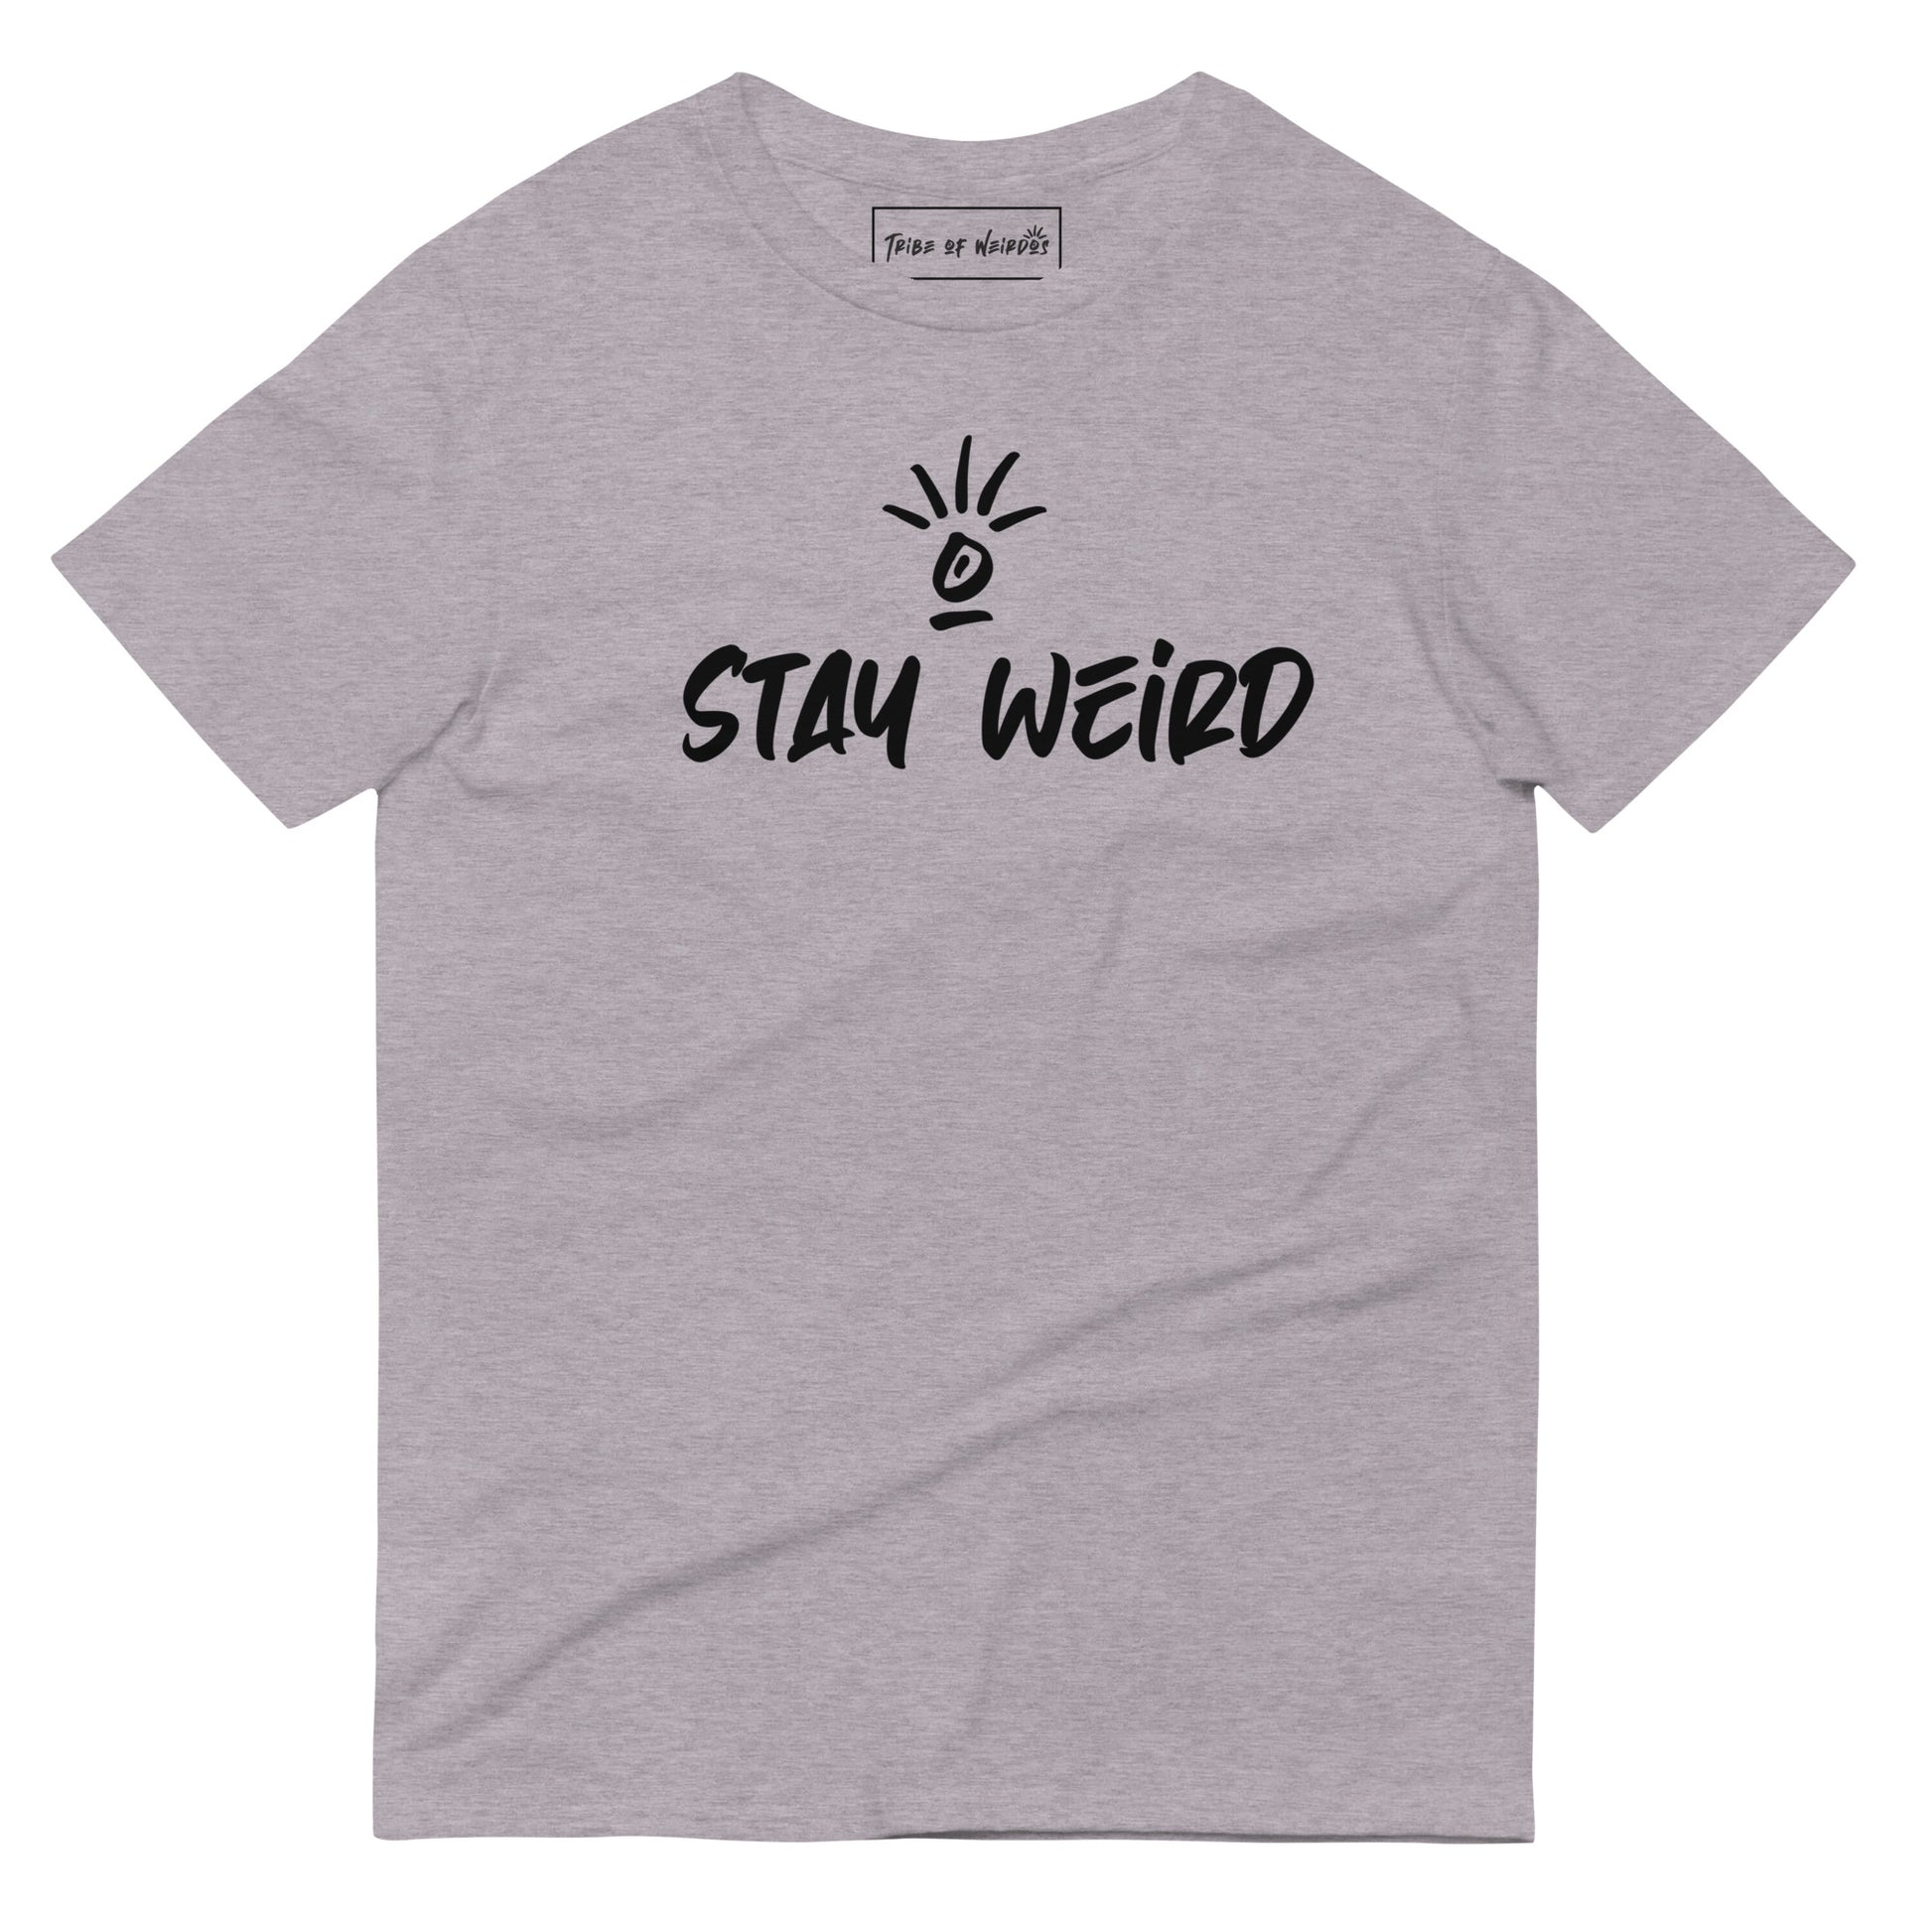 A person wearing 'Stay Weird - Join The Tribe' unisex t-shirt, showcasing a bold statement for self-expression and unity in diversity.